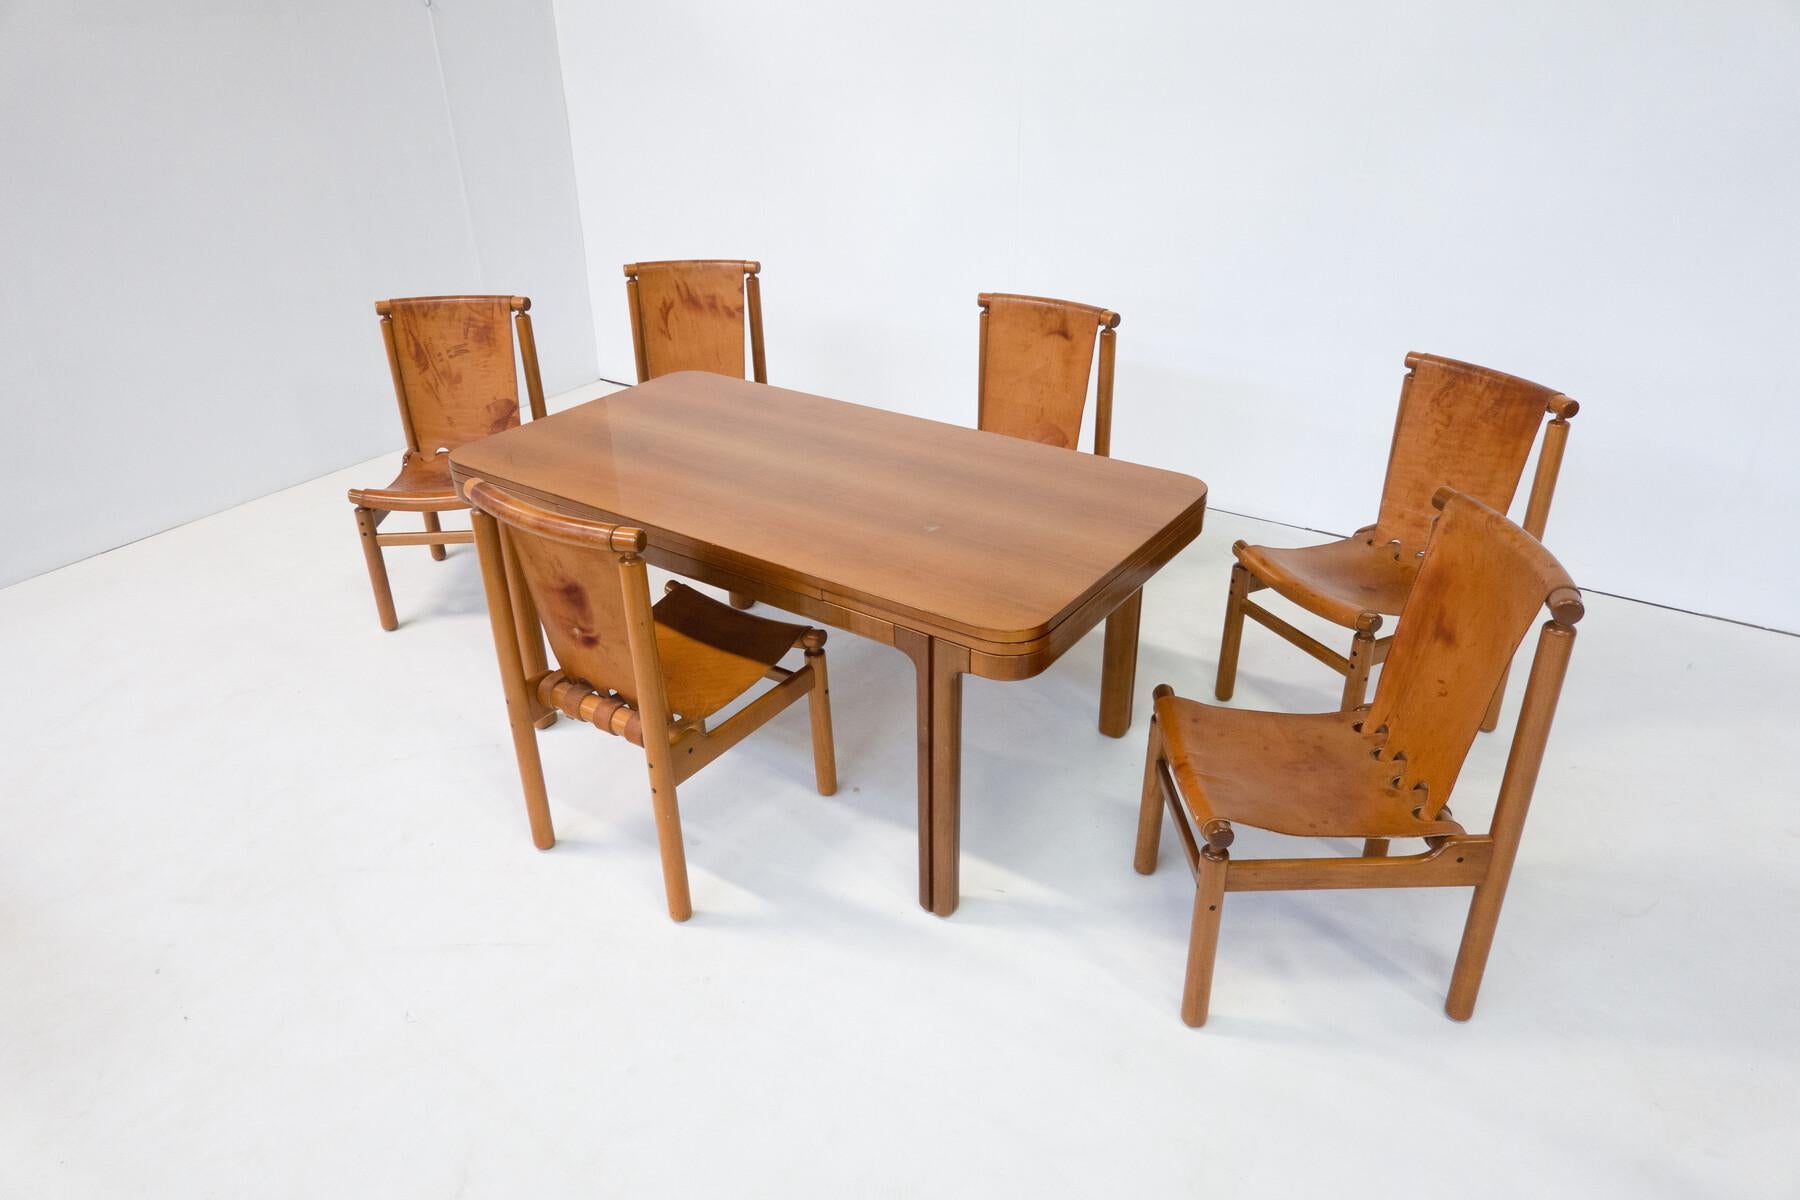 Mid-Century Modern Extendable Dining Table by Llmari Tapiovaara, Finland, 1950s For Sale 4